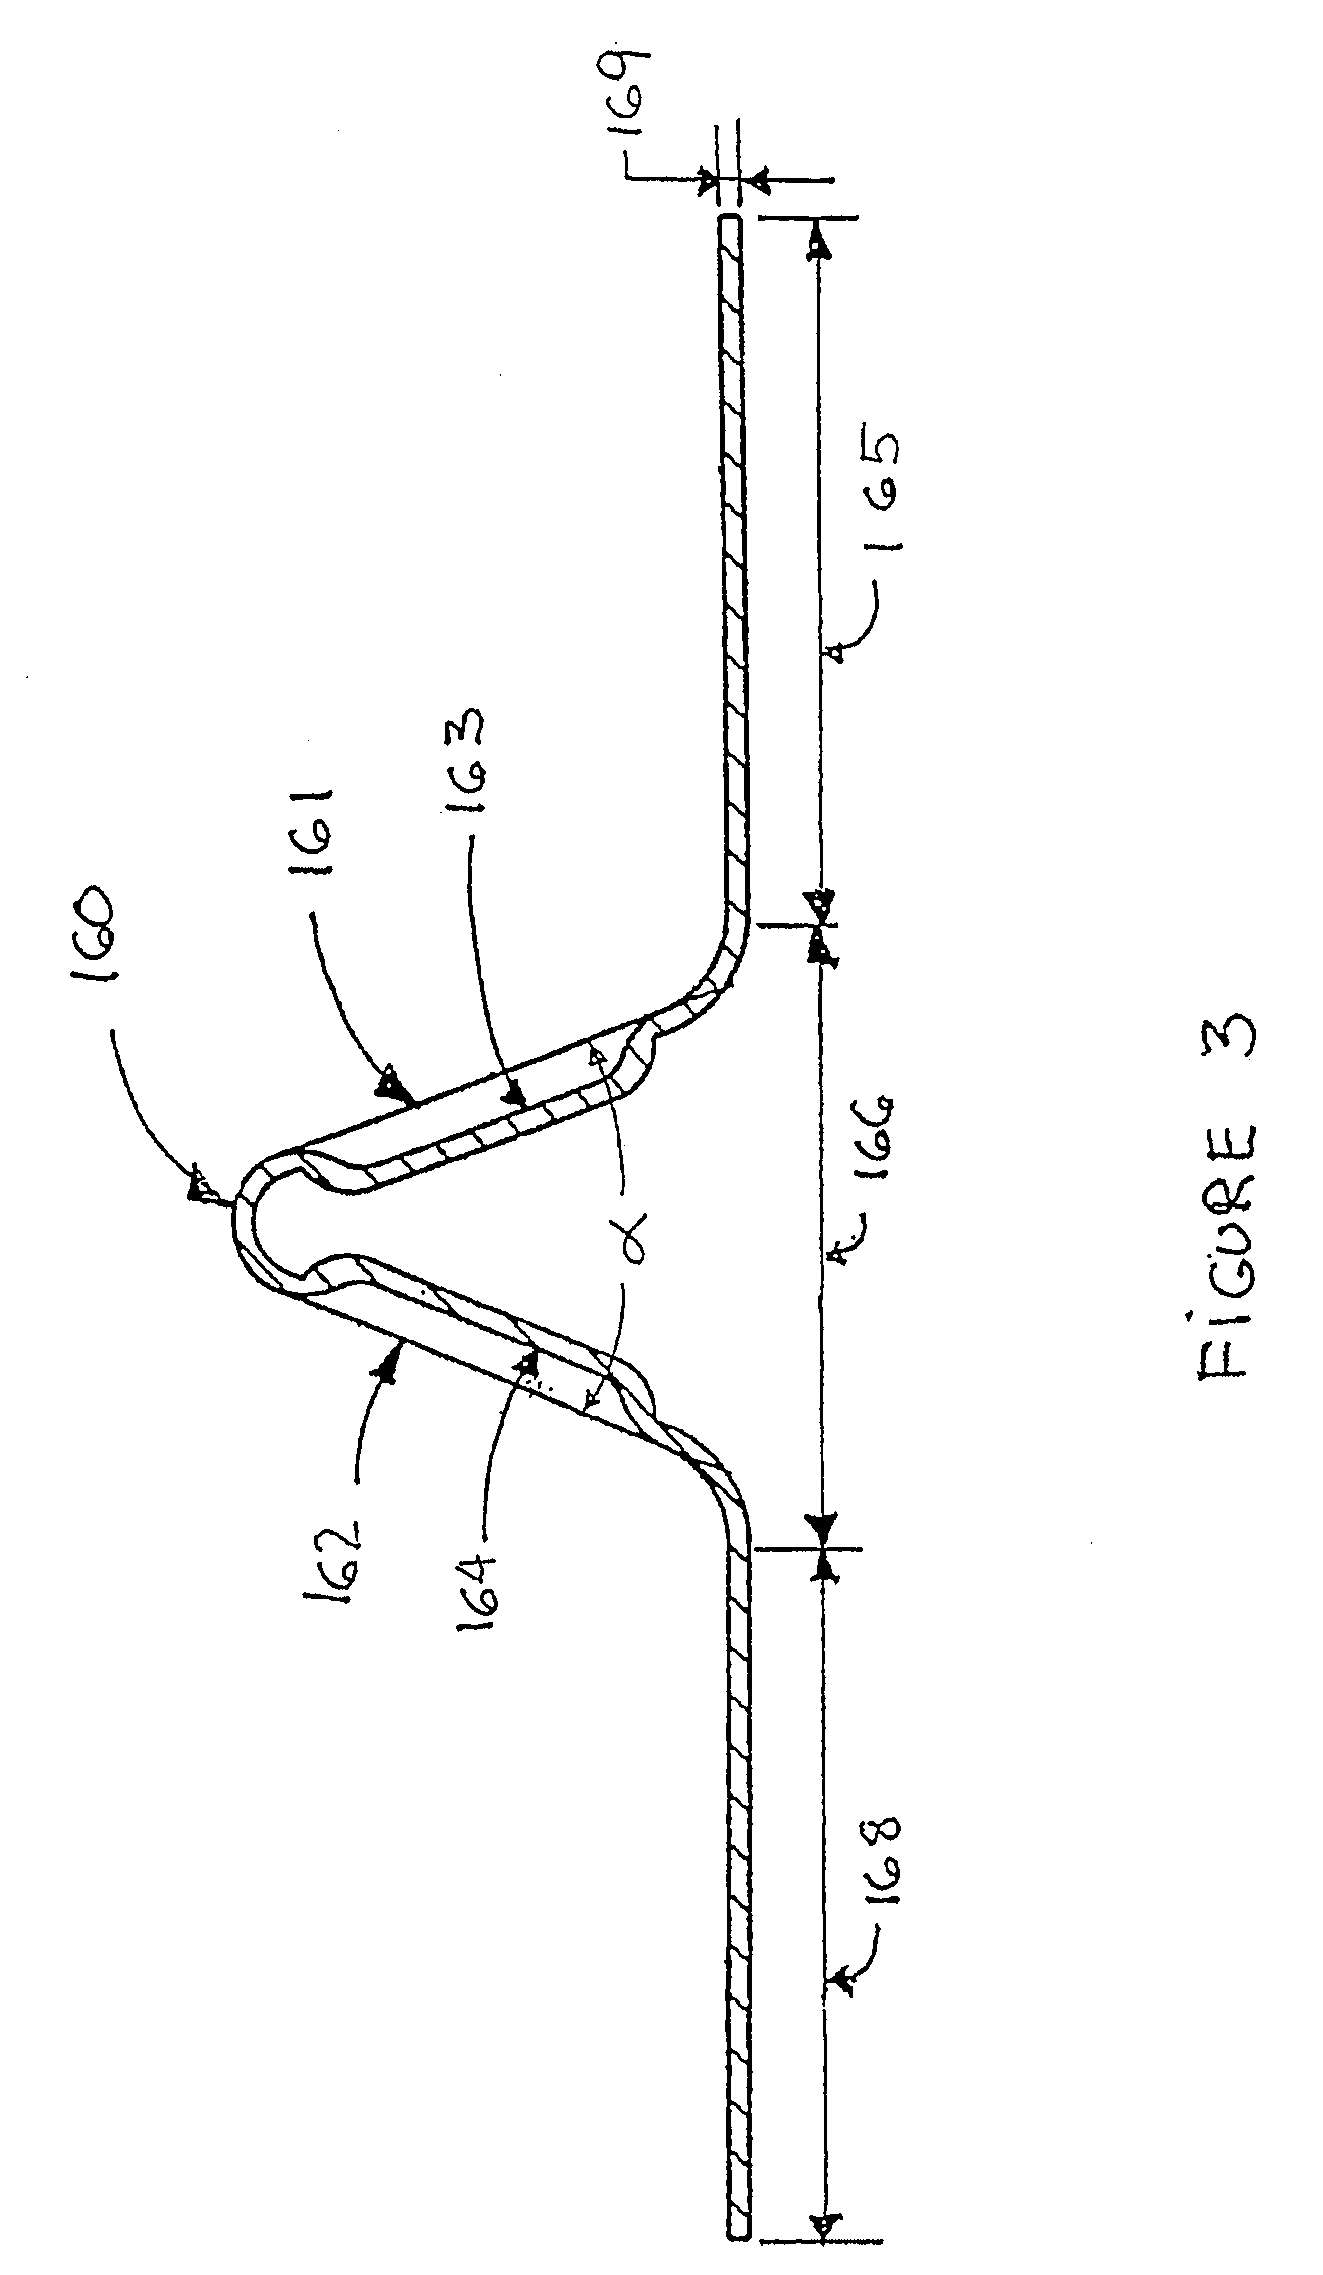 Elastomeric track with guide lug reinforcements